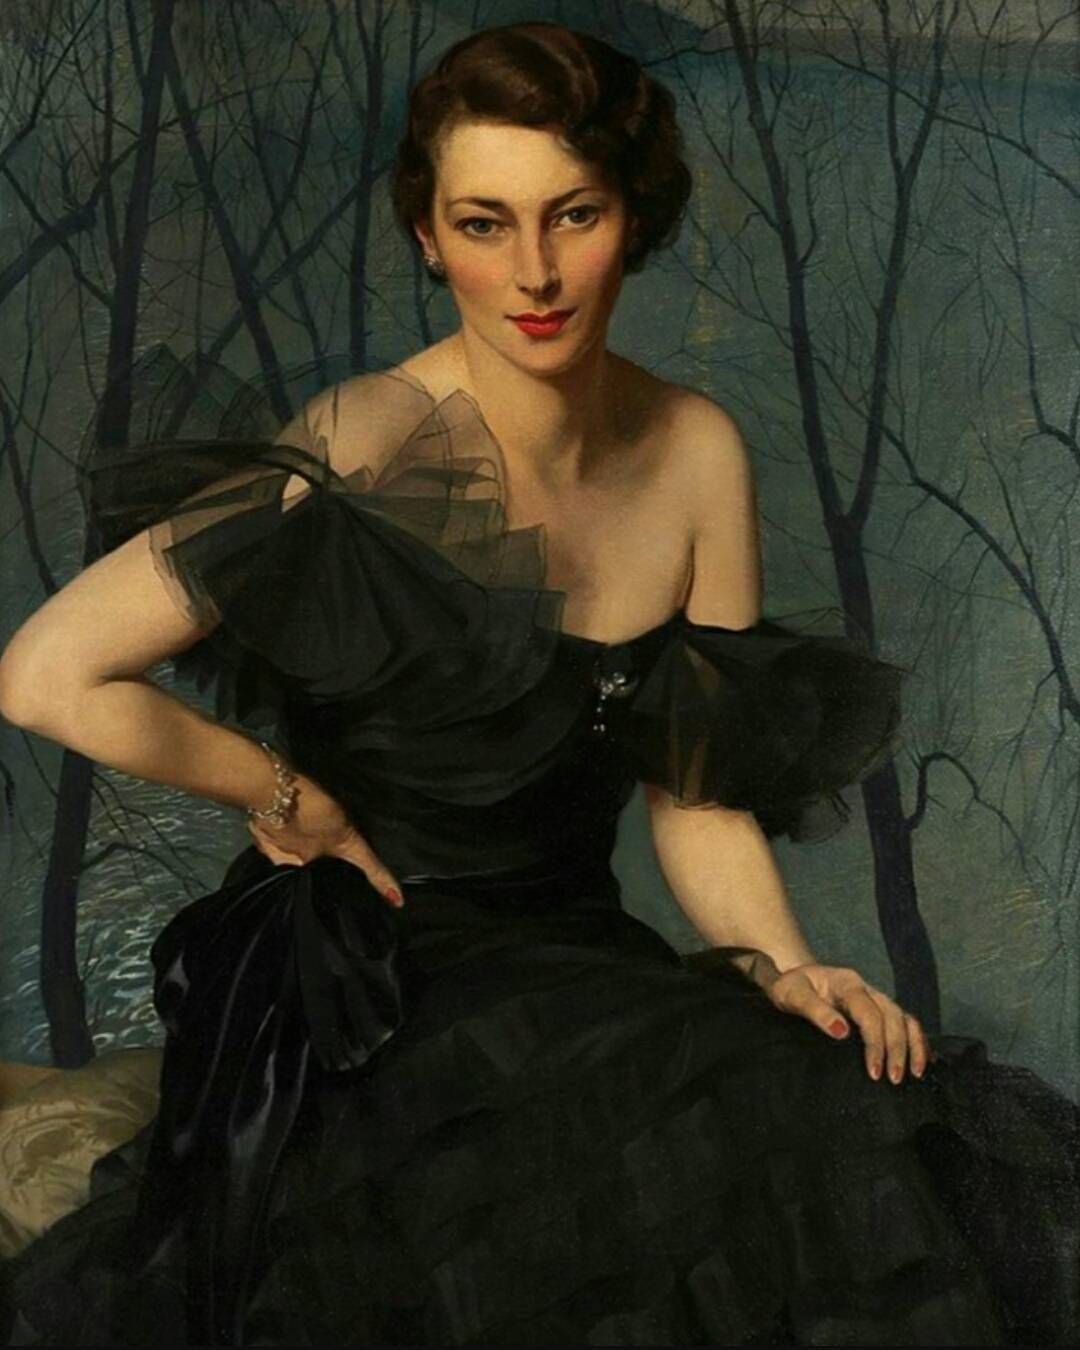 Pauline in Paris (1936). Herbert James Gunn (Scottish, 1893-1964). Oil on canvas.
Pauline in Paris is at her most radiant, with her arresting red lipstick and her glamorous evening gown revealing two bare shoulders. There is so much emphasis on...